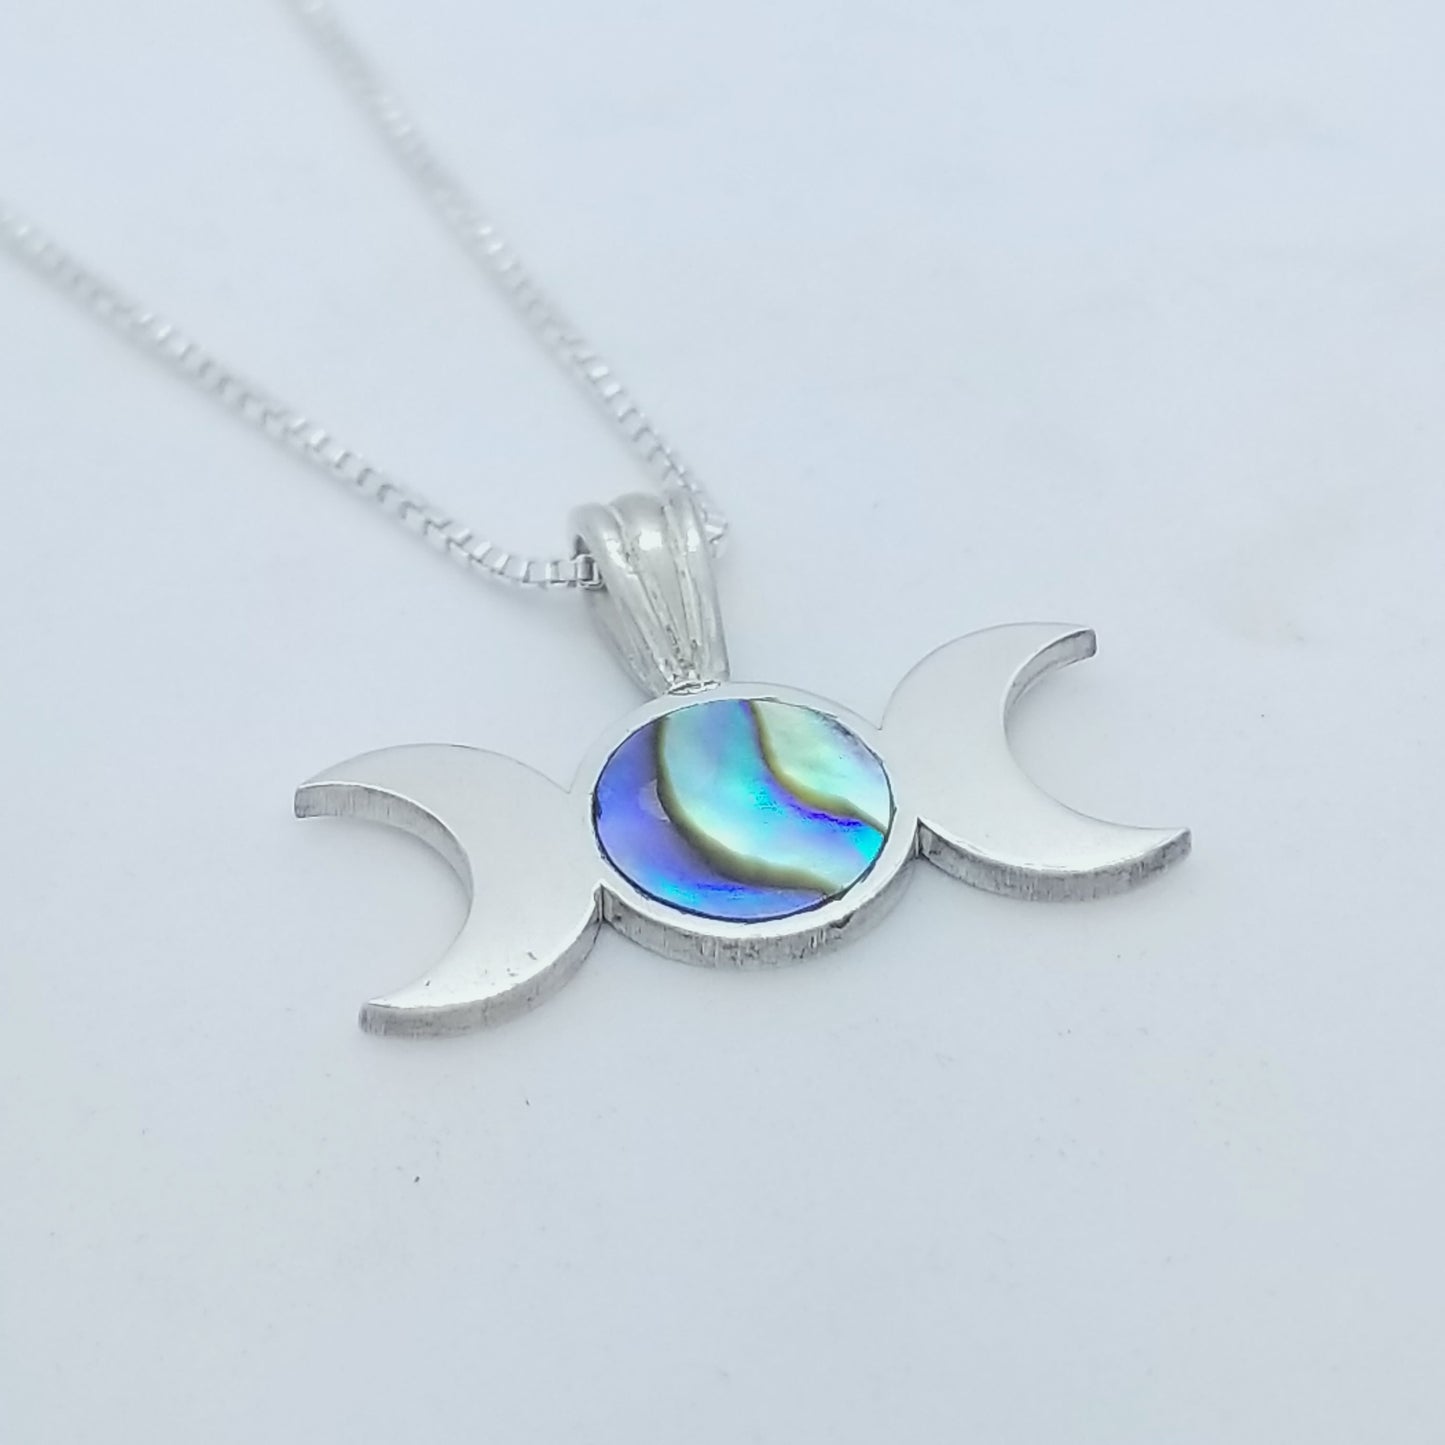 Silver and Abalone Triple Moon Pendant